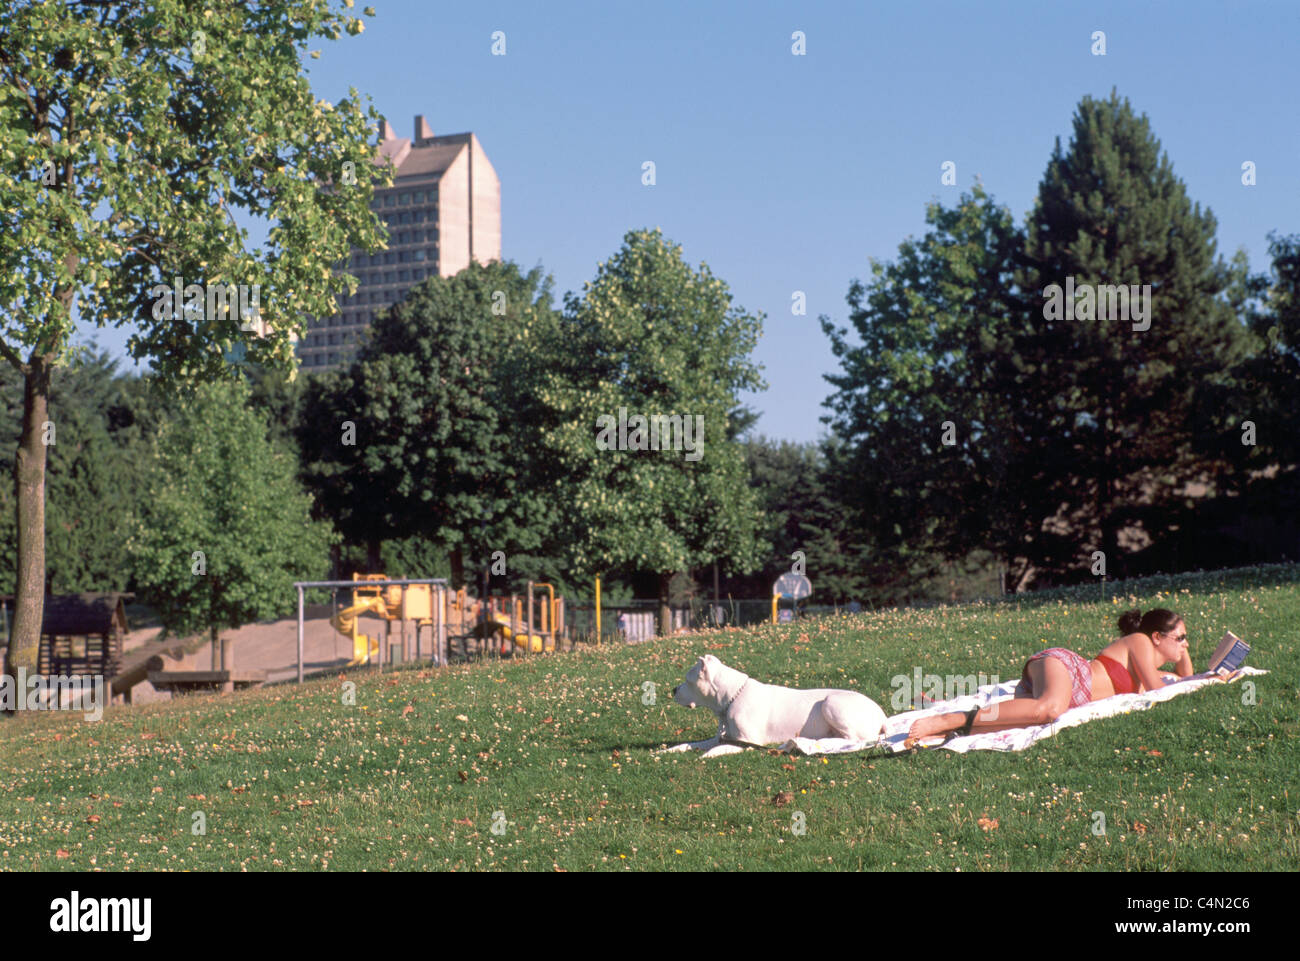 Woman sunbathing with Pet Dog on a Blanket and reading a Book in an Urban Park Stock Photo